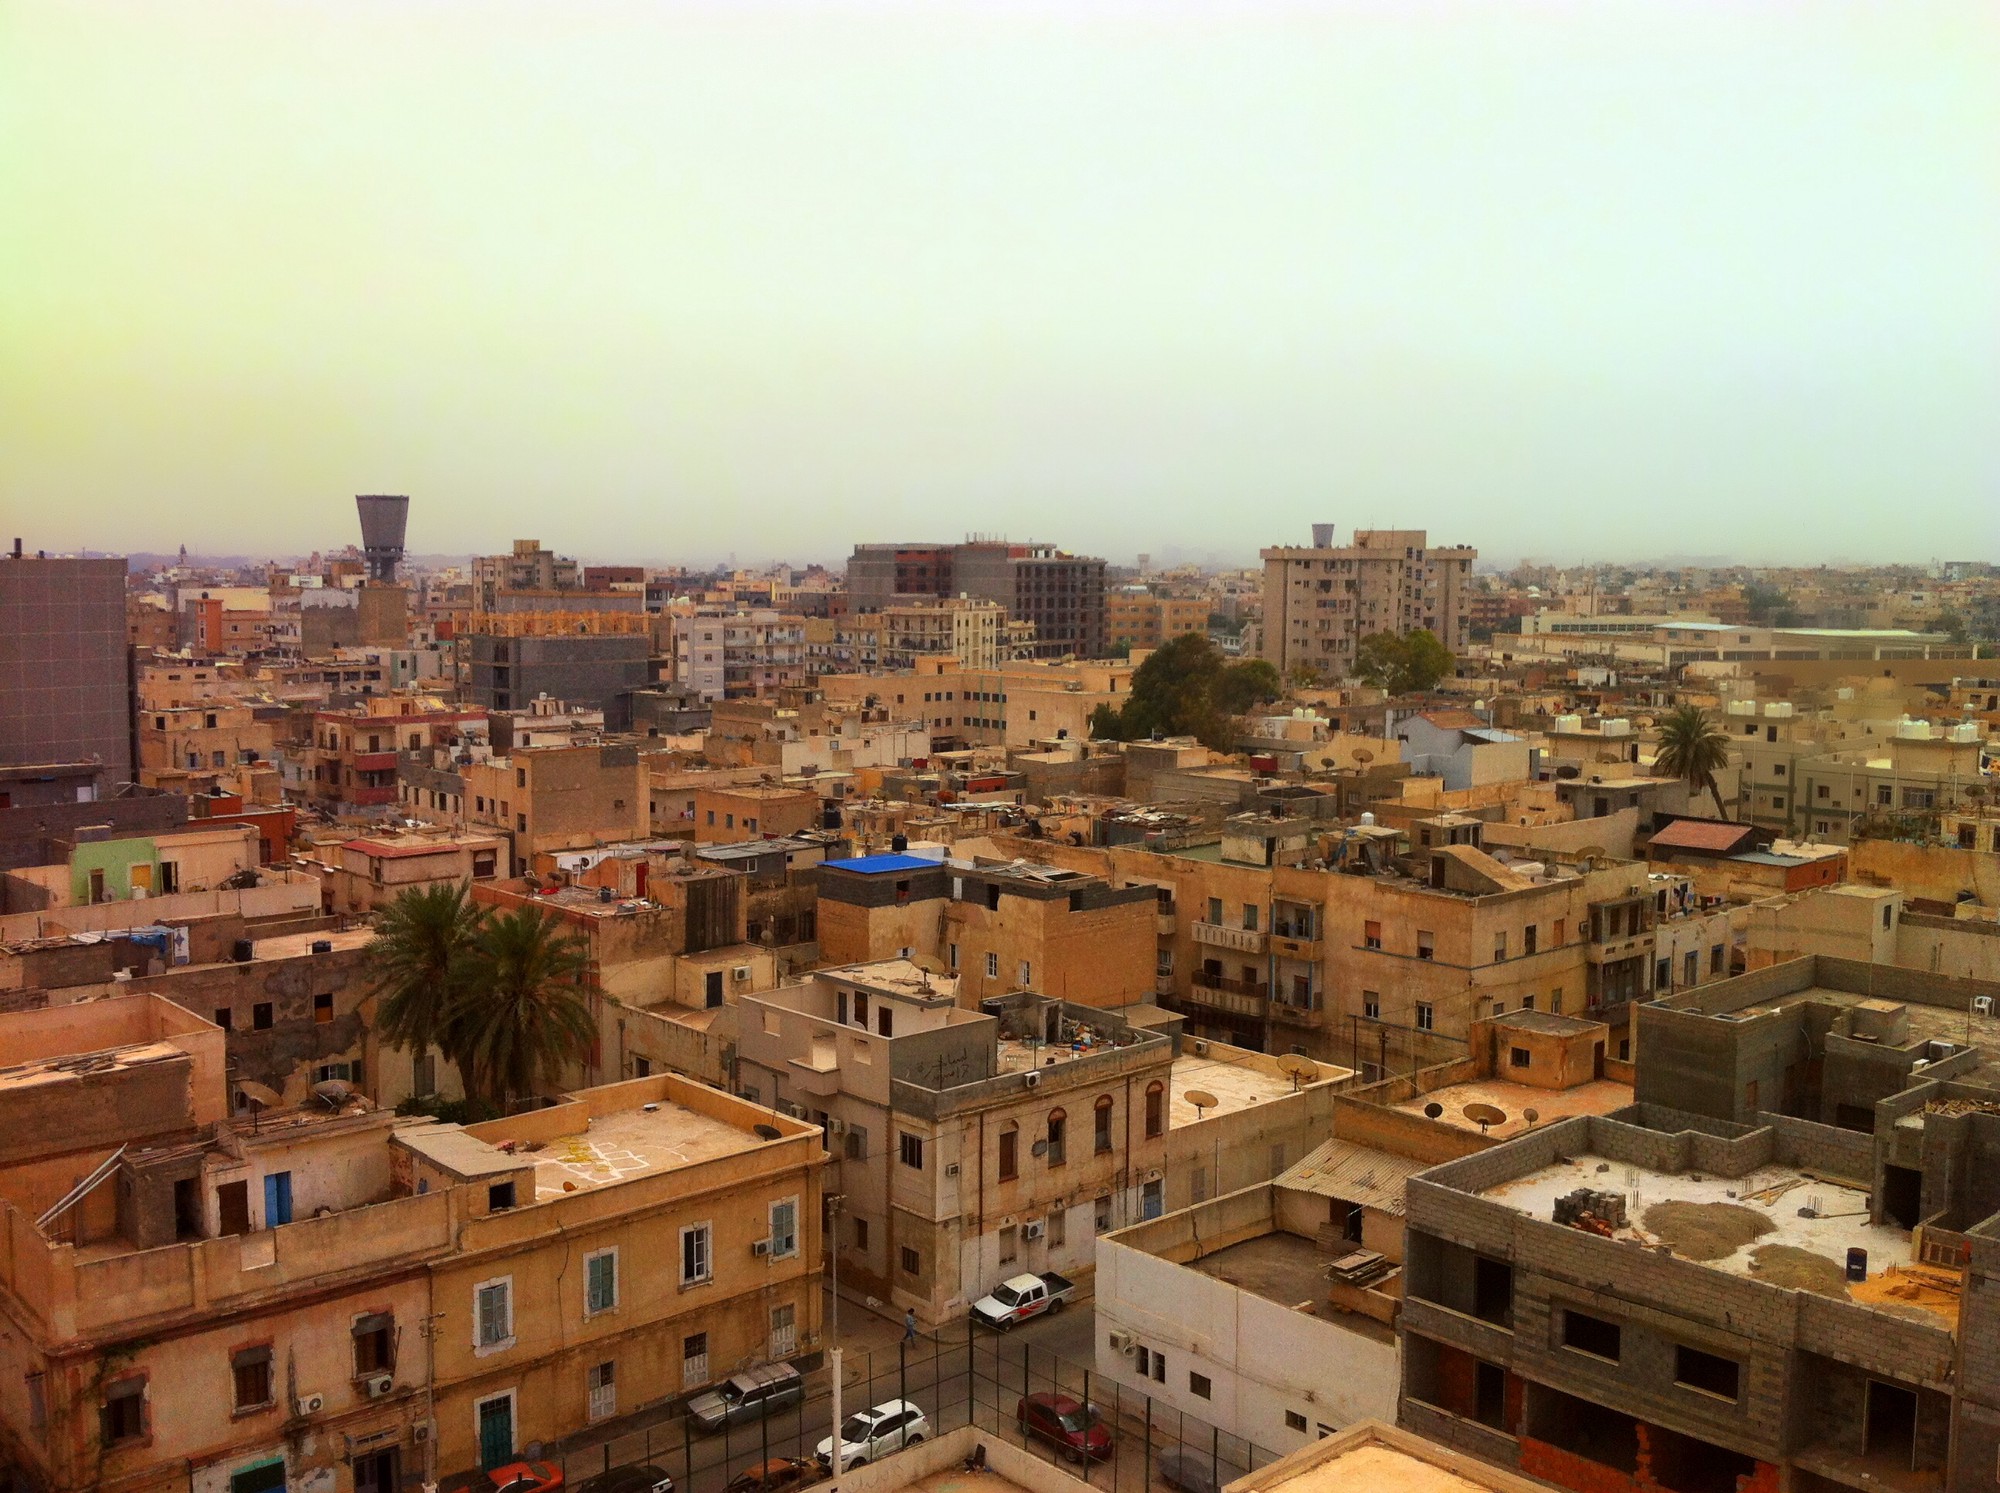 The call centre, based in Tripoli, receives thousands of calls from people across Libya. Photo: Shutterstock/ TheRunomon